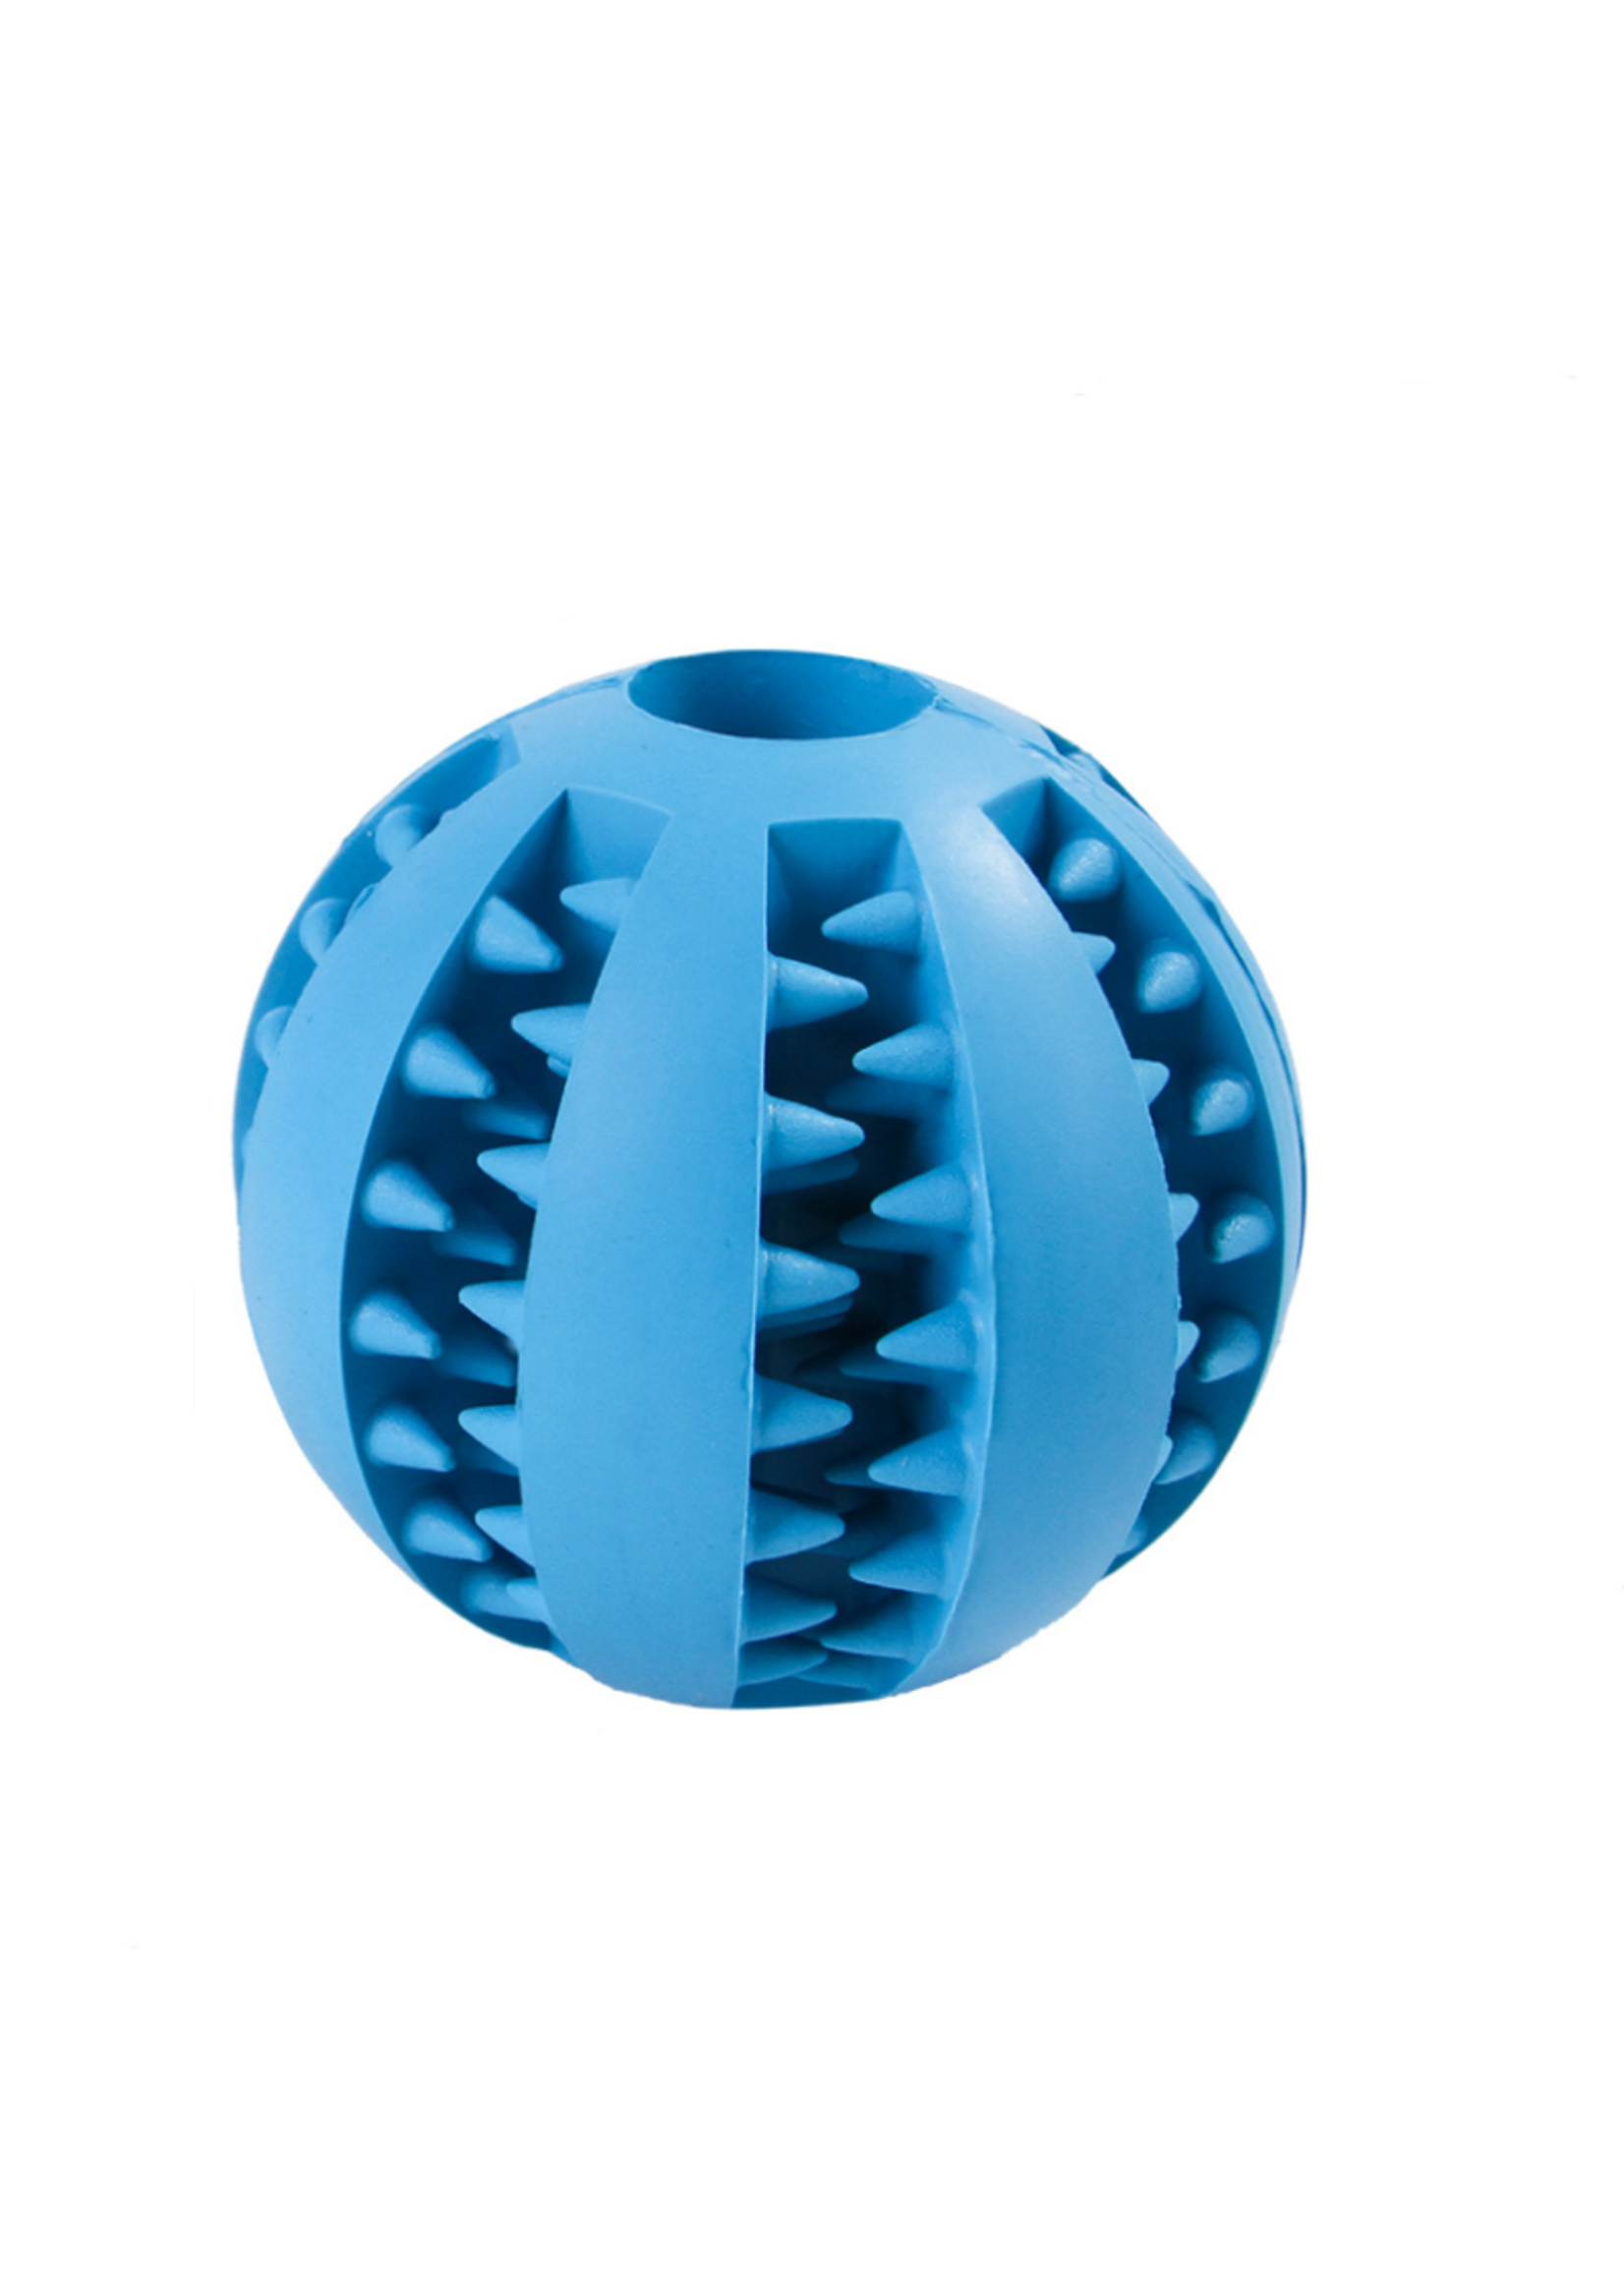 Hirolulu Interactive Dog Toys Balls,Dog Treat Puzzle Ball for